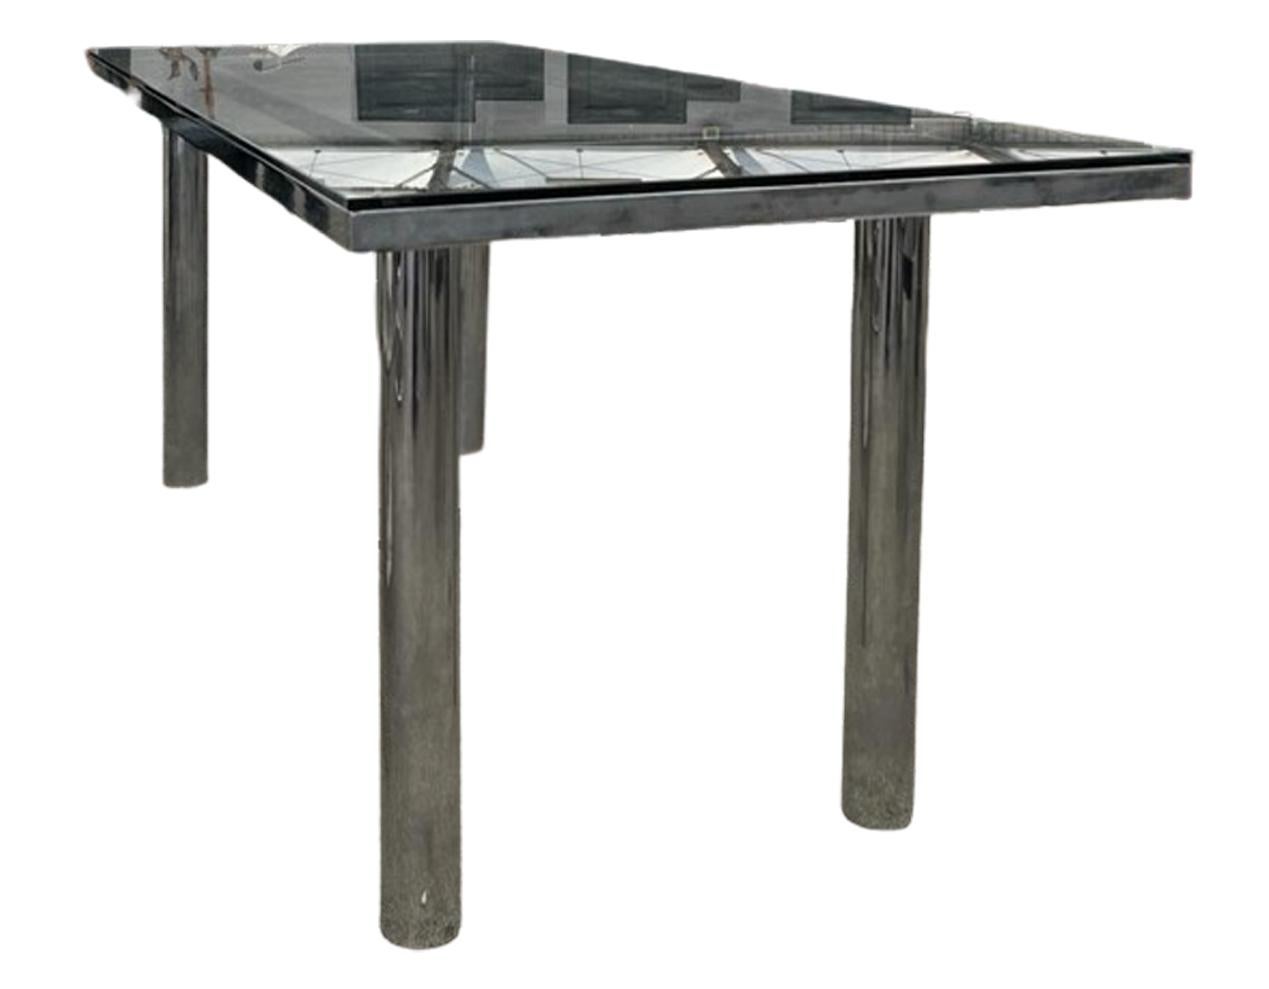 Large rectangular dining table designed by Tobia Scarpa for Gavina circa 1960s. Chrome-plated metal structure, glass top (not original).

Timeless and attractive design.

Slight wear from age and use.


